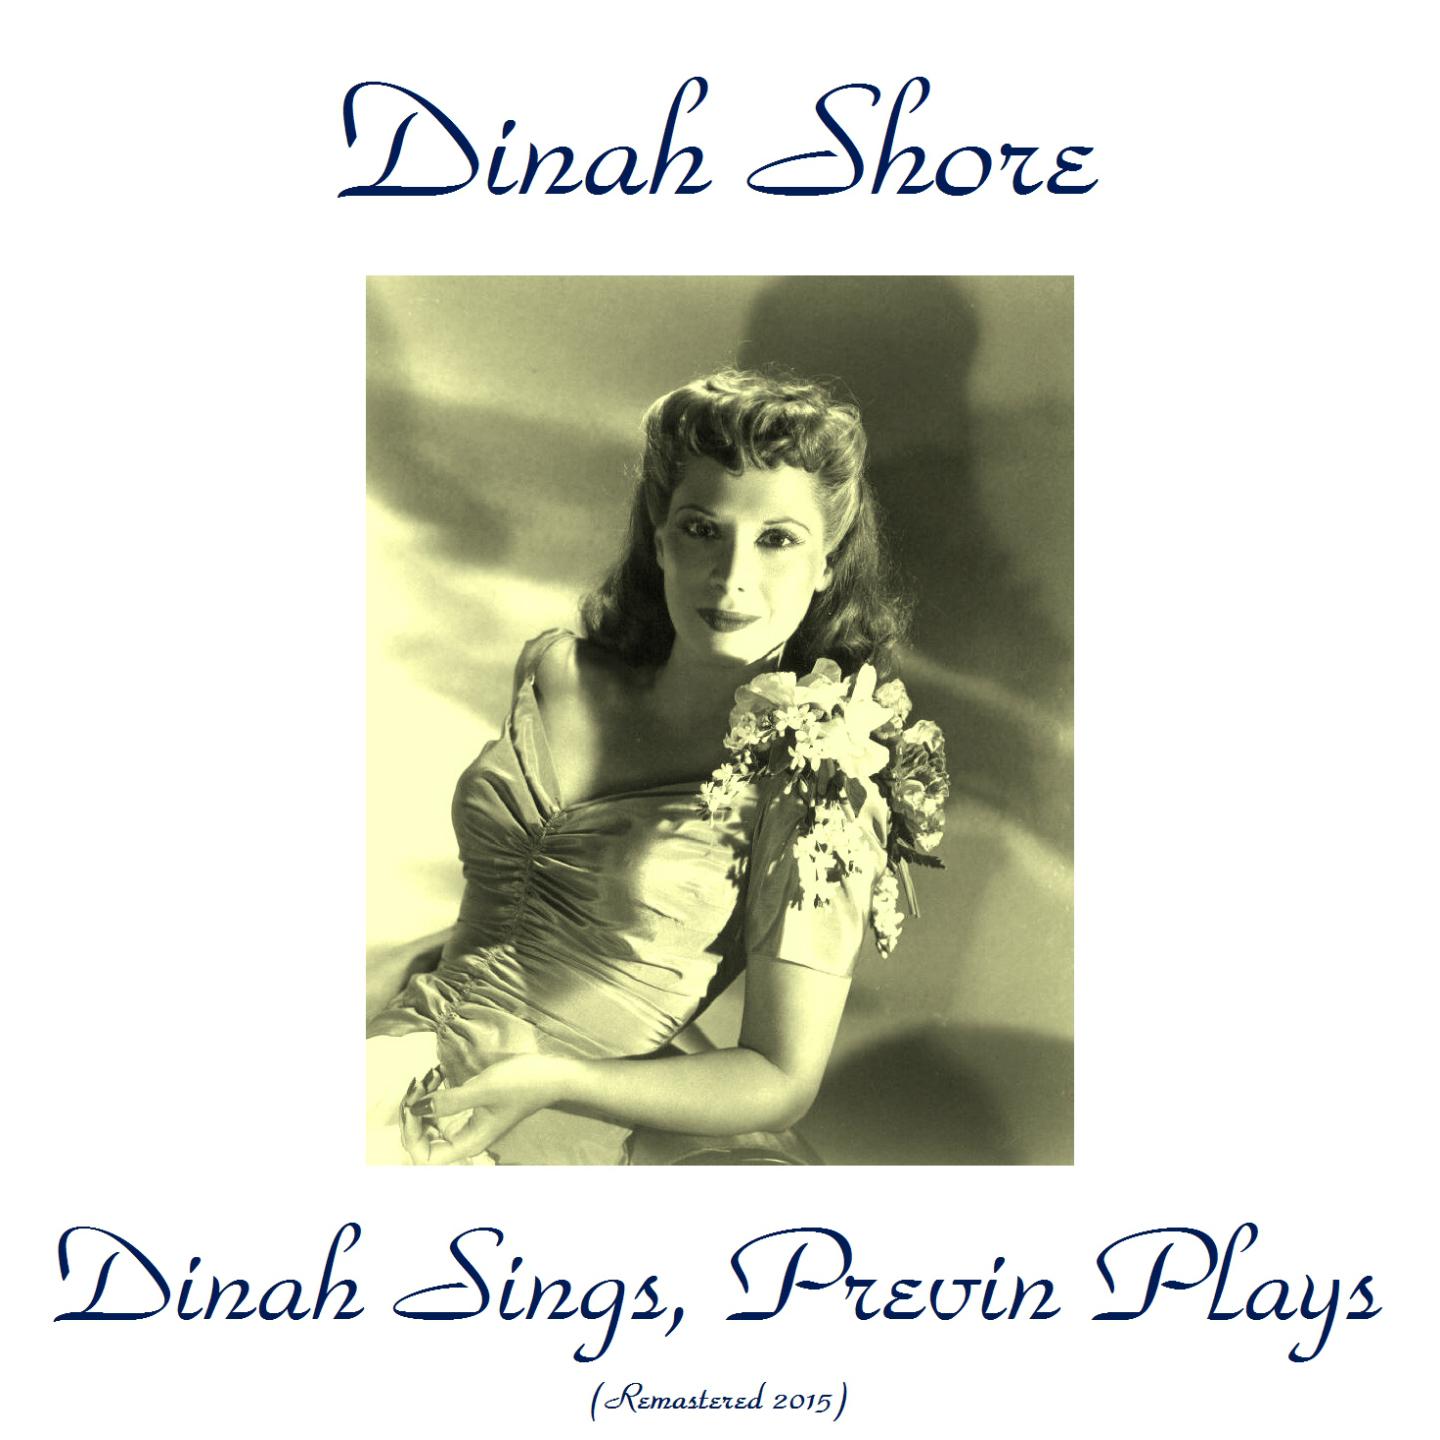 Dinah Sings, Previn Plays (Remastered 2015)